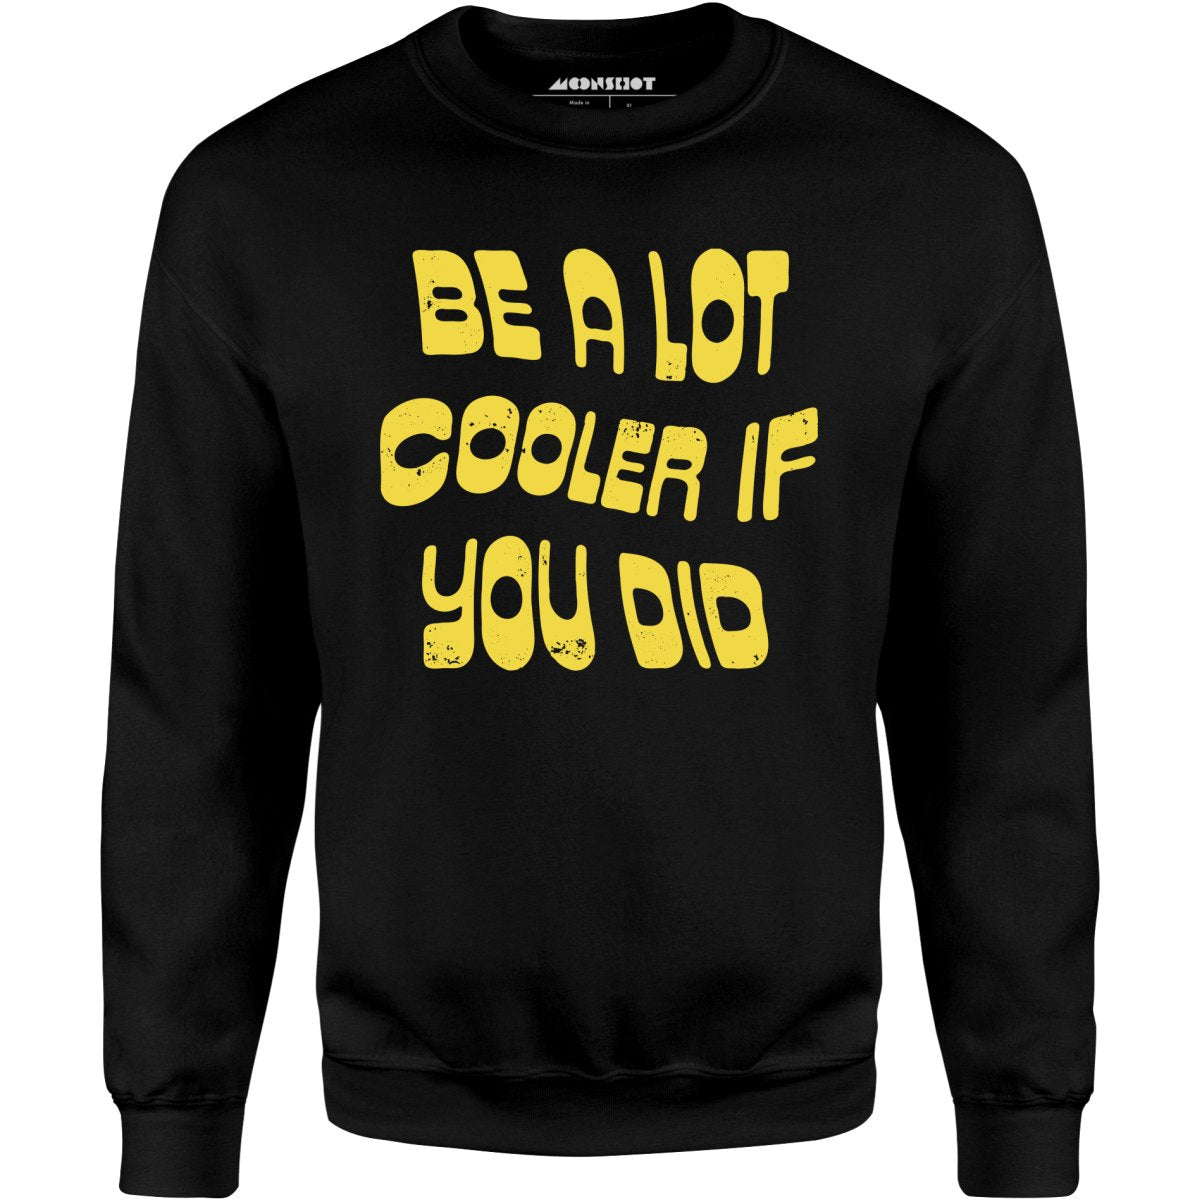 Be a Lot Cooler if You Did - Unisex Sweatshirt